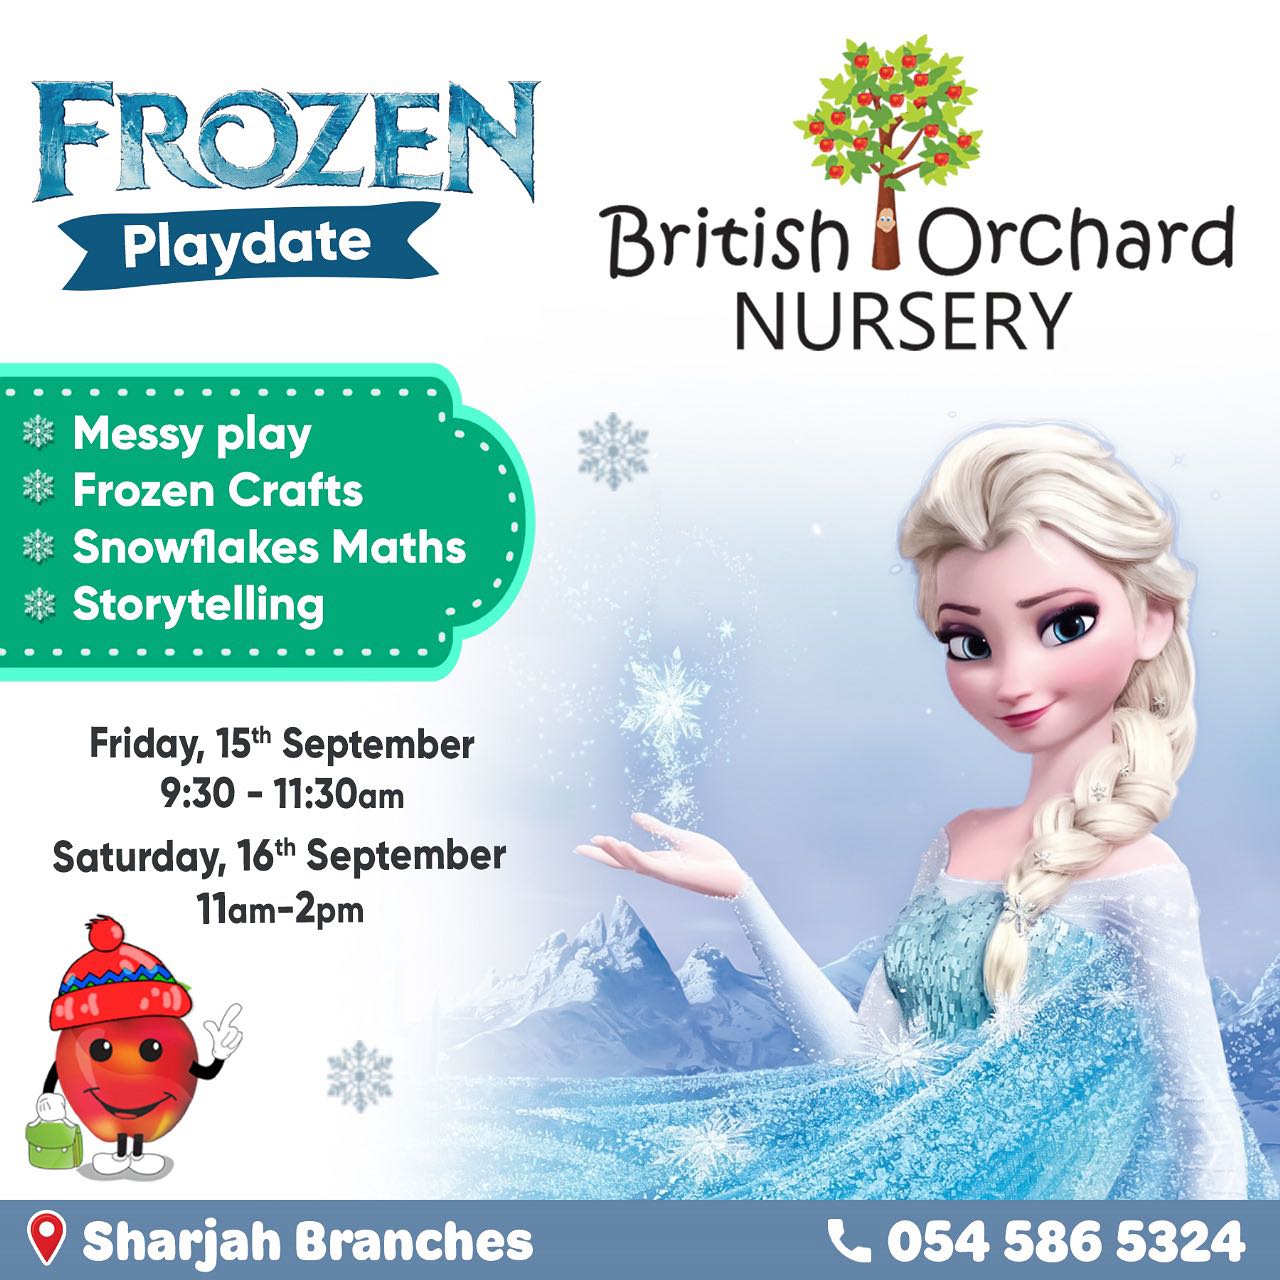 Beat the Heat ☀️ with our FROZEN Play date this weekend ! ❄️